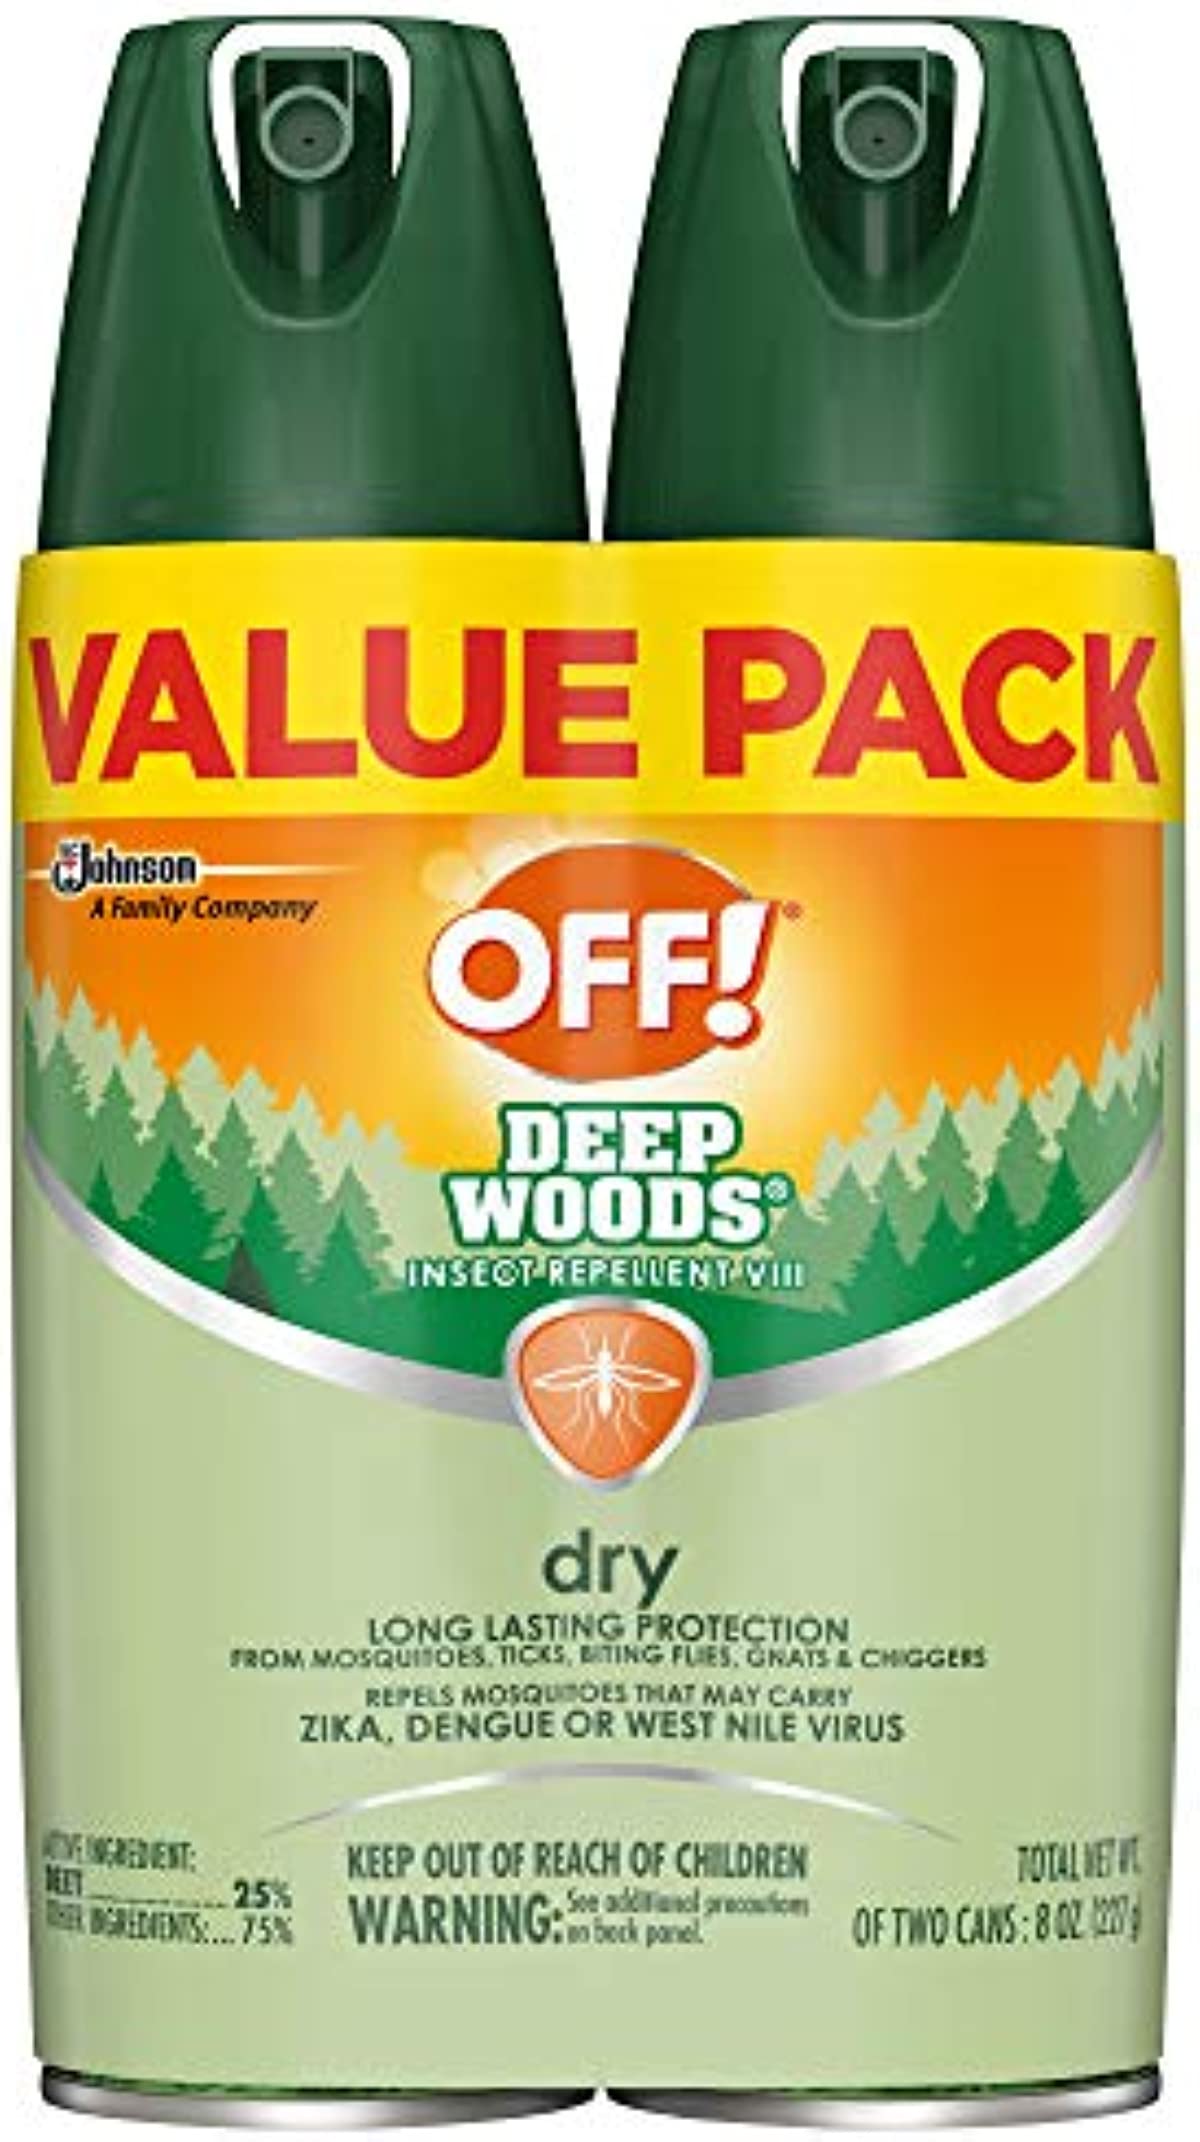 OFF! Deep Woods Insect Repellent Aerosol, Dry, Non-Greasy Formula, Bug Spray with Long Lasting Protection from Mosquitoes, 8 oz (Pack of 2)